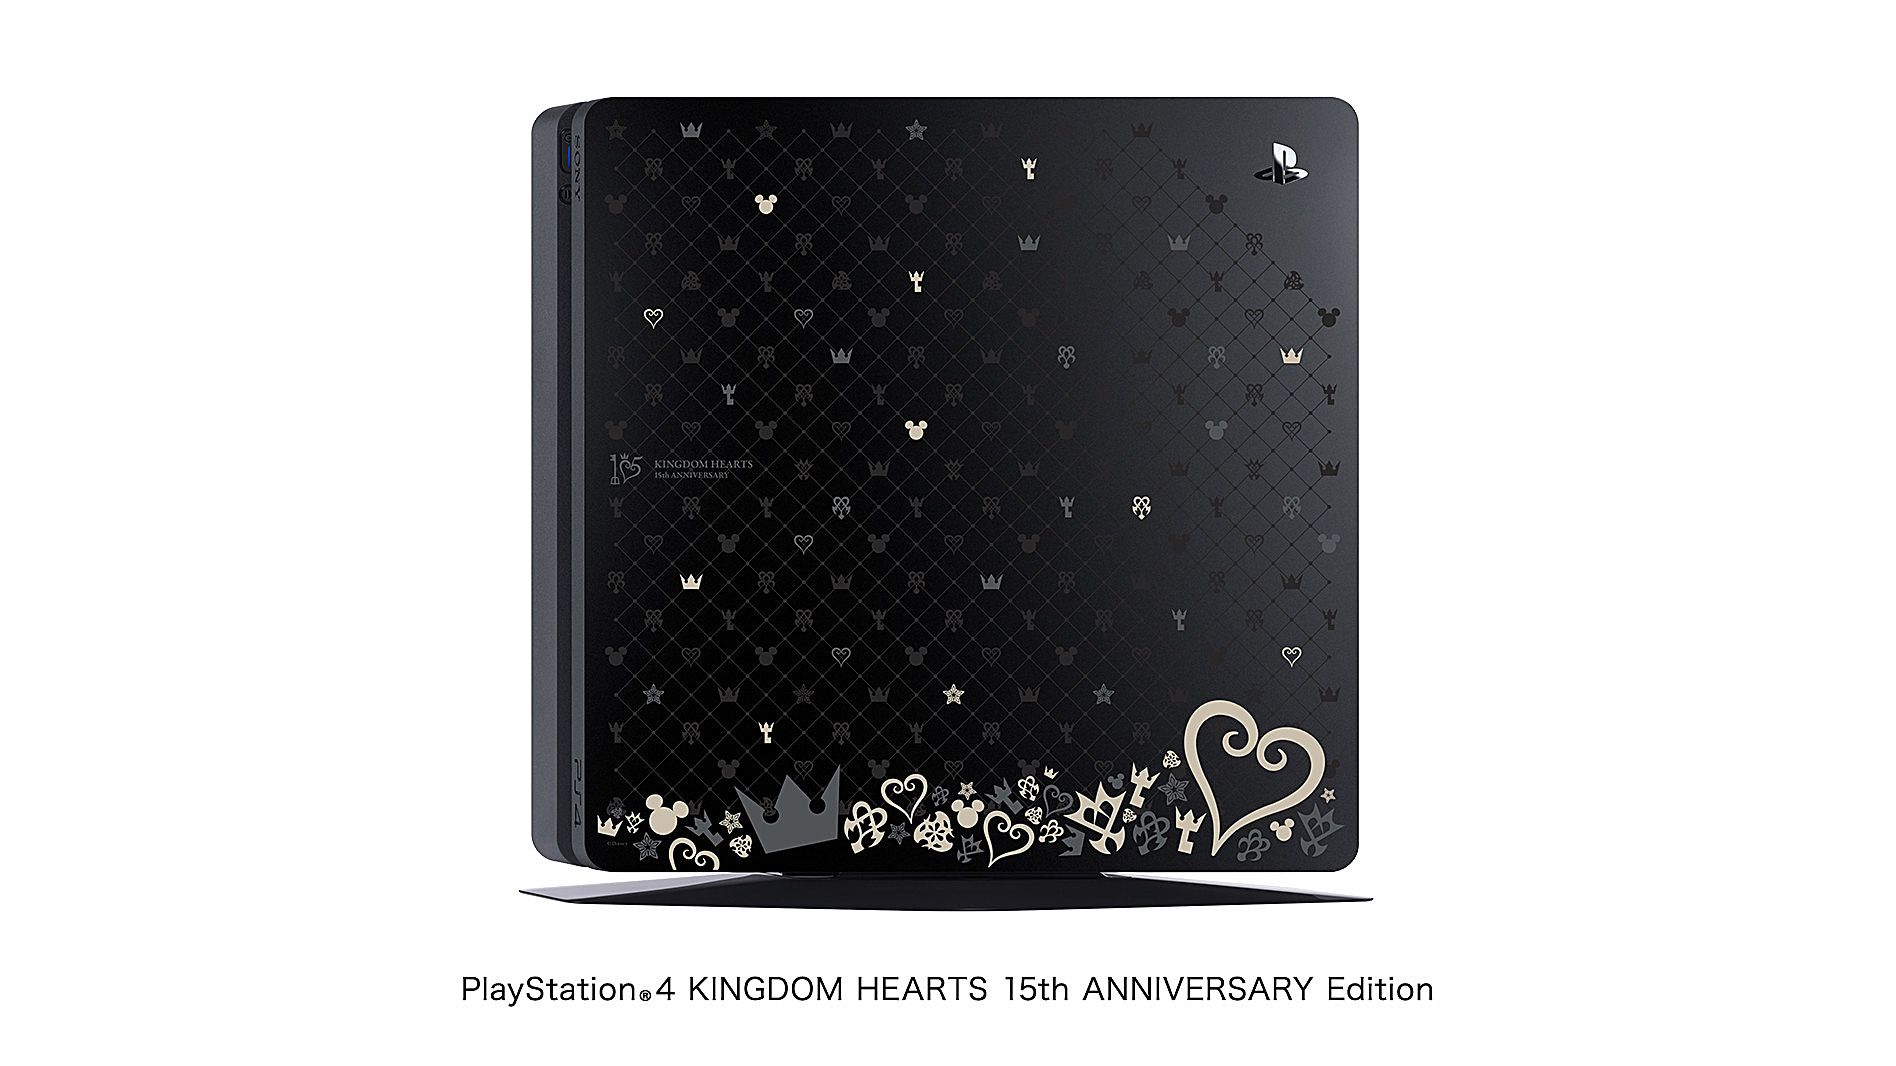 Sony Announces Limited Edition Kingdom Hearts 15th